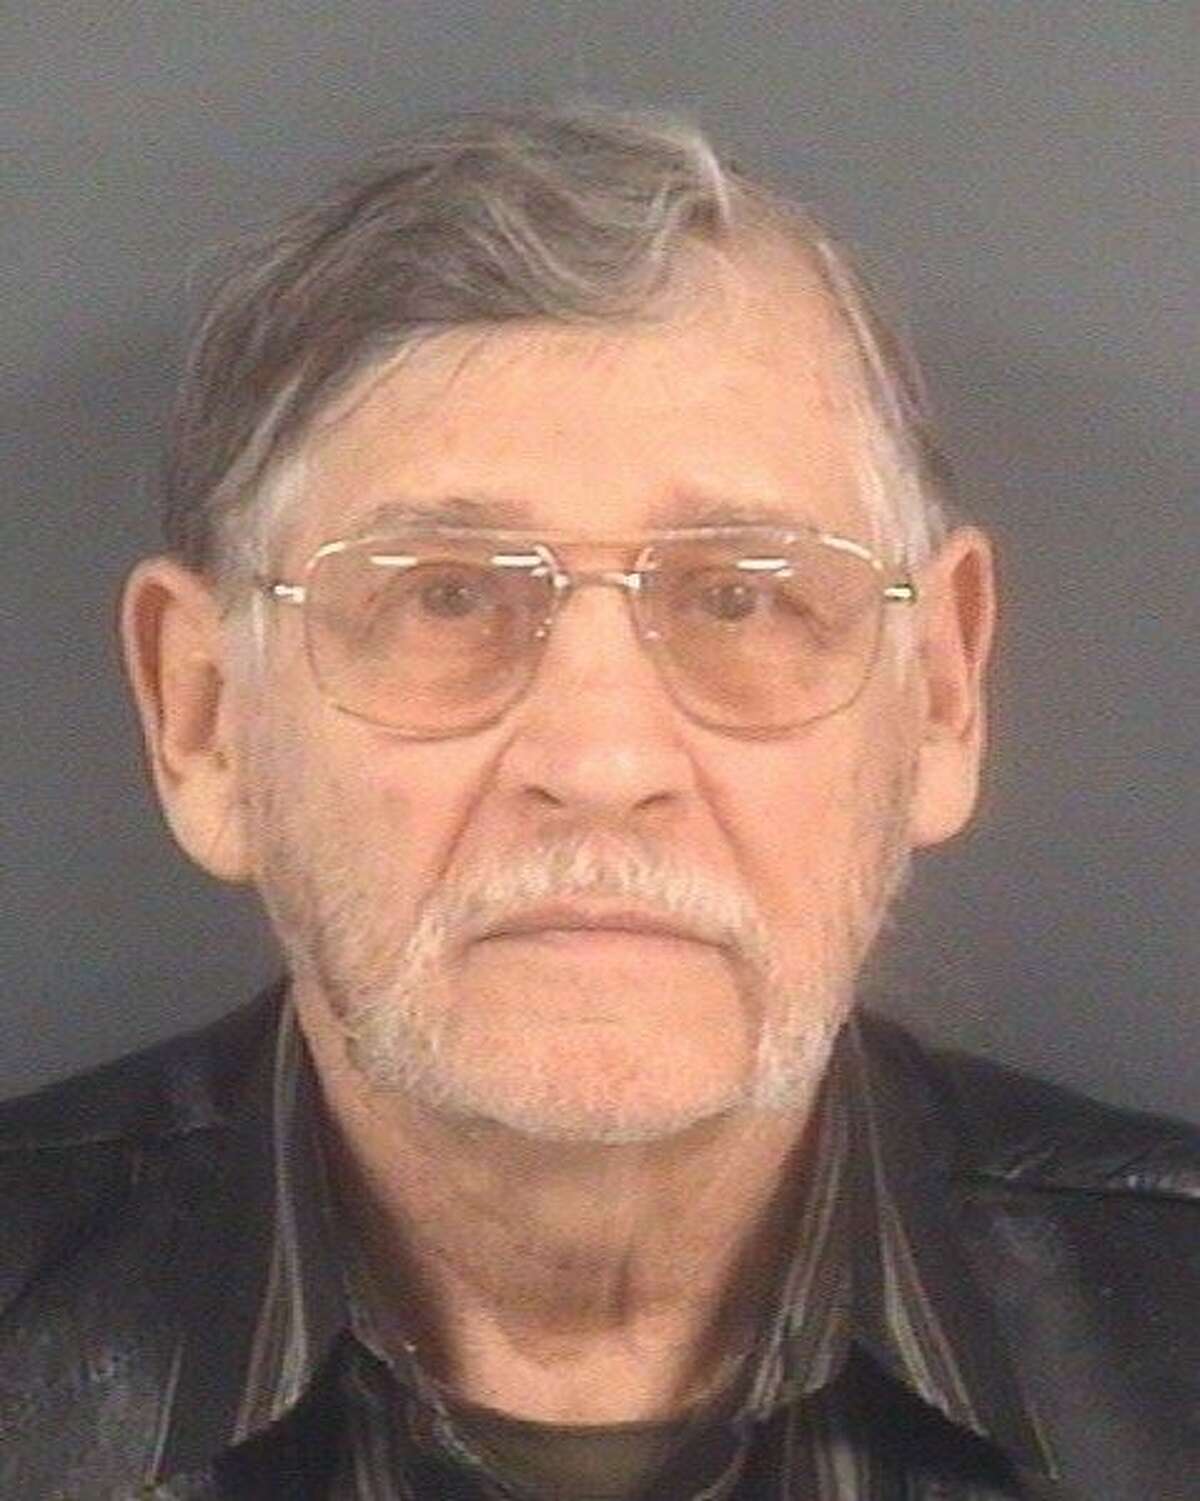 John Franklin McGraw, 78, has been charged with assault and battery and disorderly conduct after allegedly sucker-punching a protester at a Donald Trump rally on March 9, 2016, in Fayetteville, North Carolina.